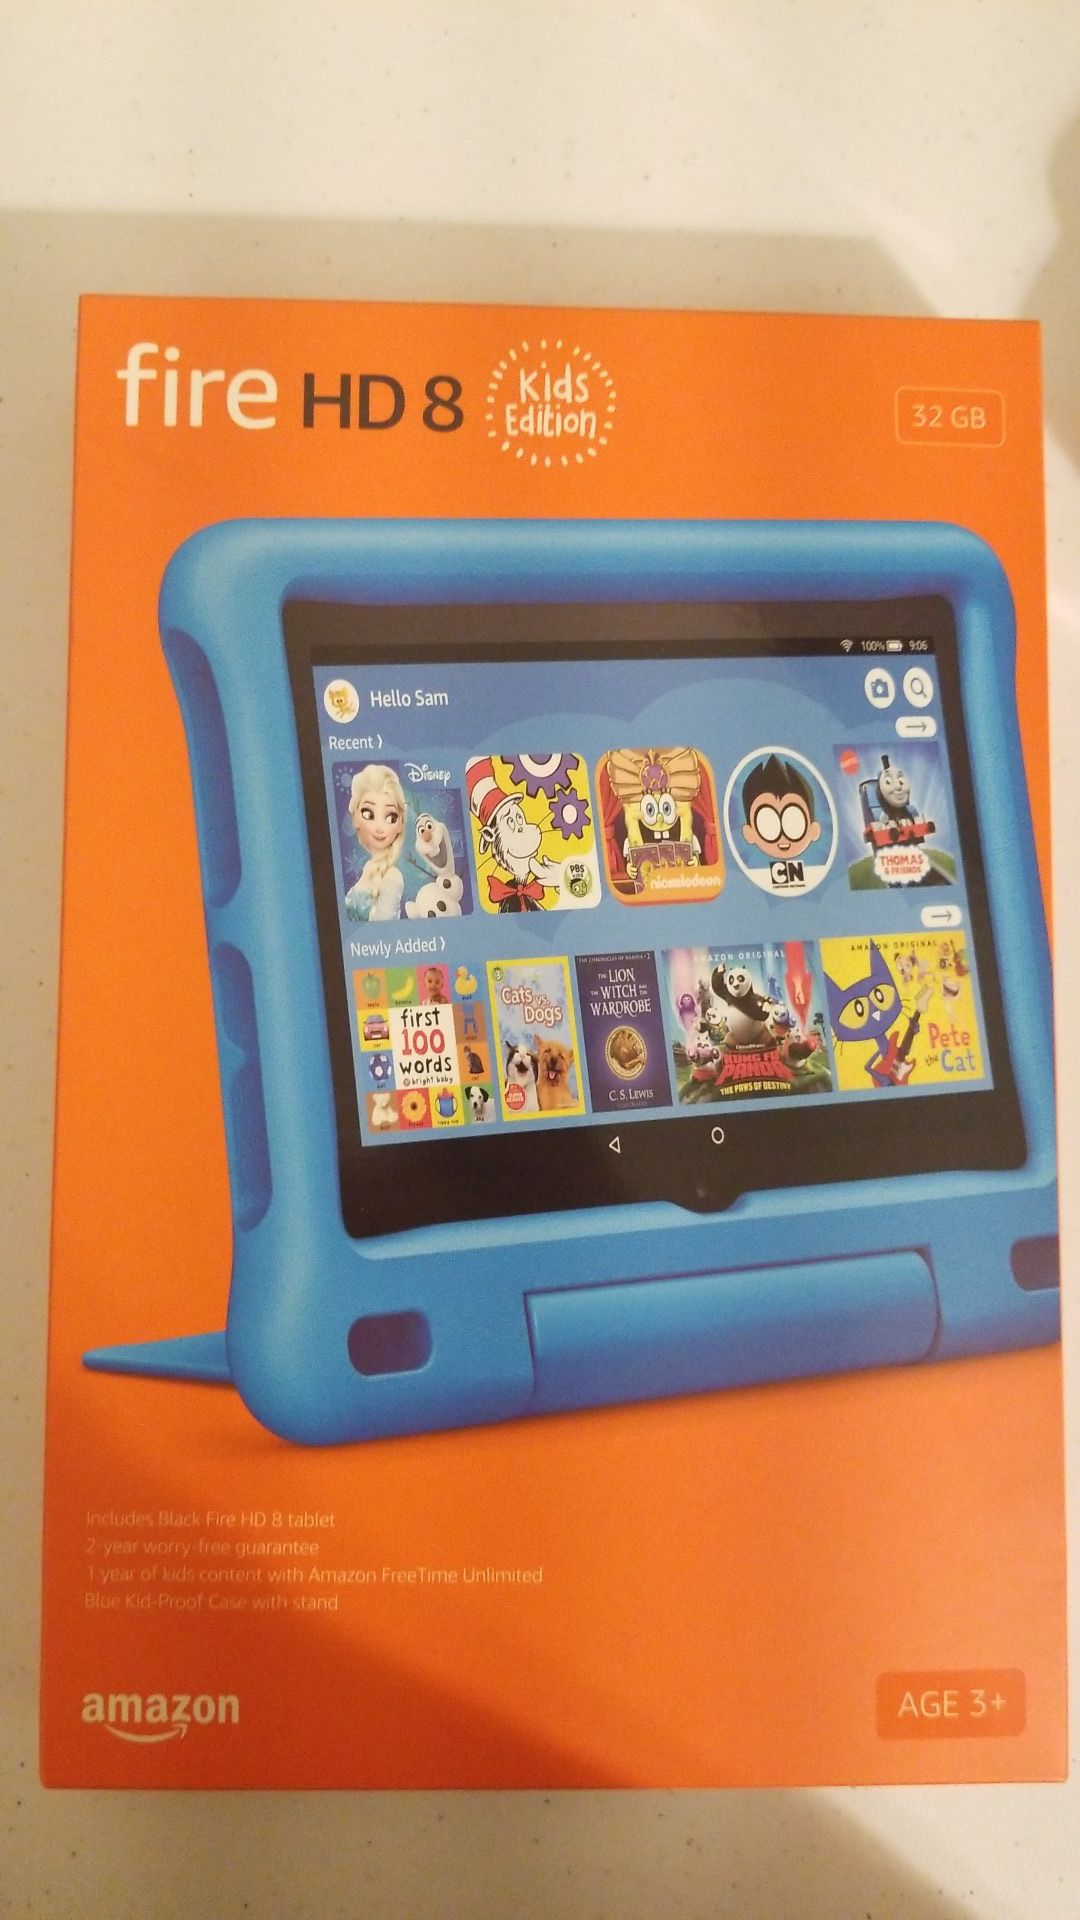 Amazon Fire Tablet HD 8 Kids Addition 32GB Light Blue Case with Stand - Brand New Never Used